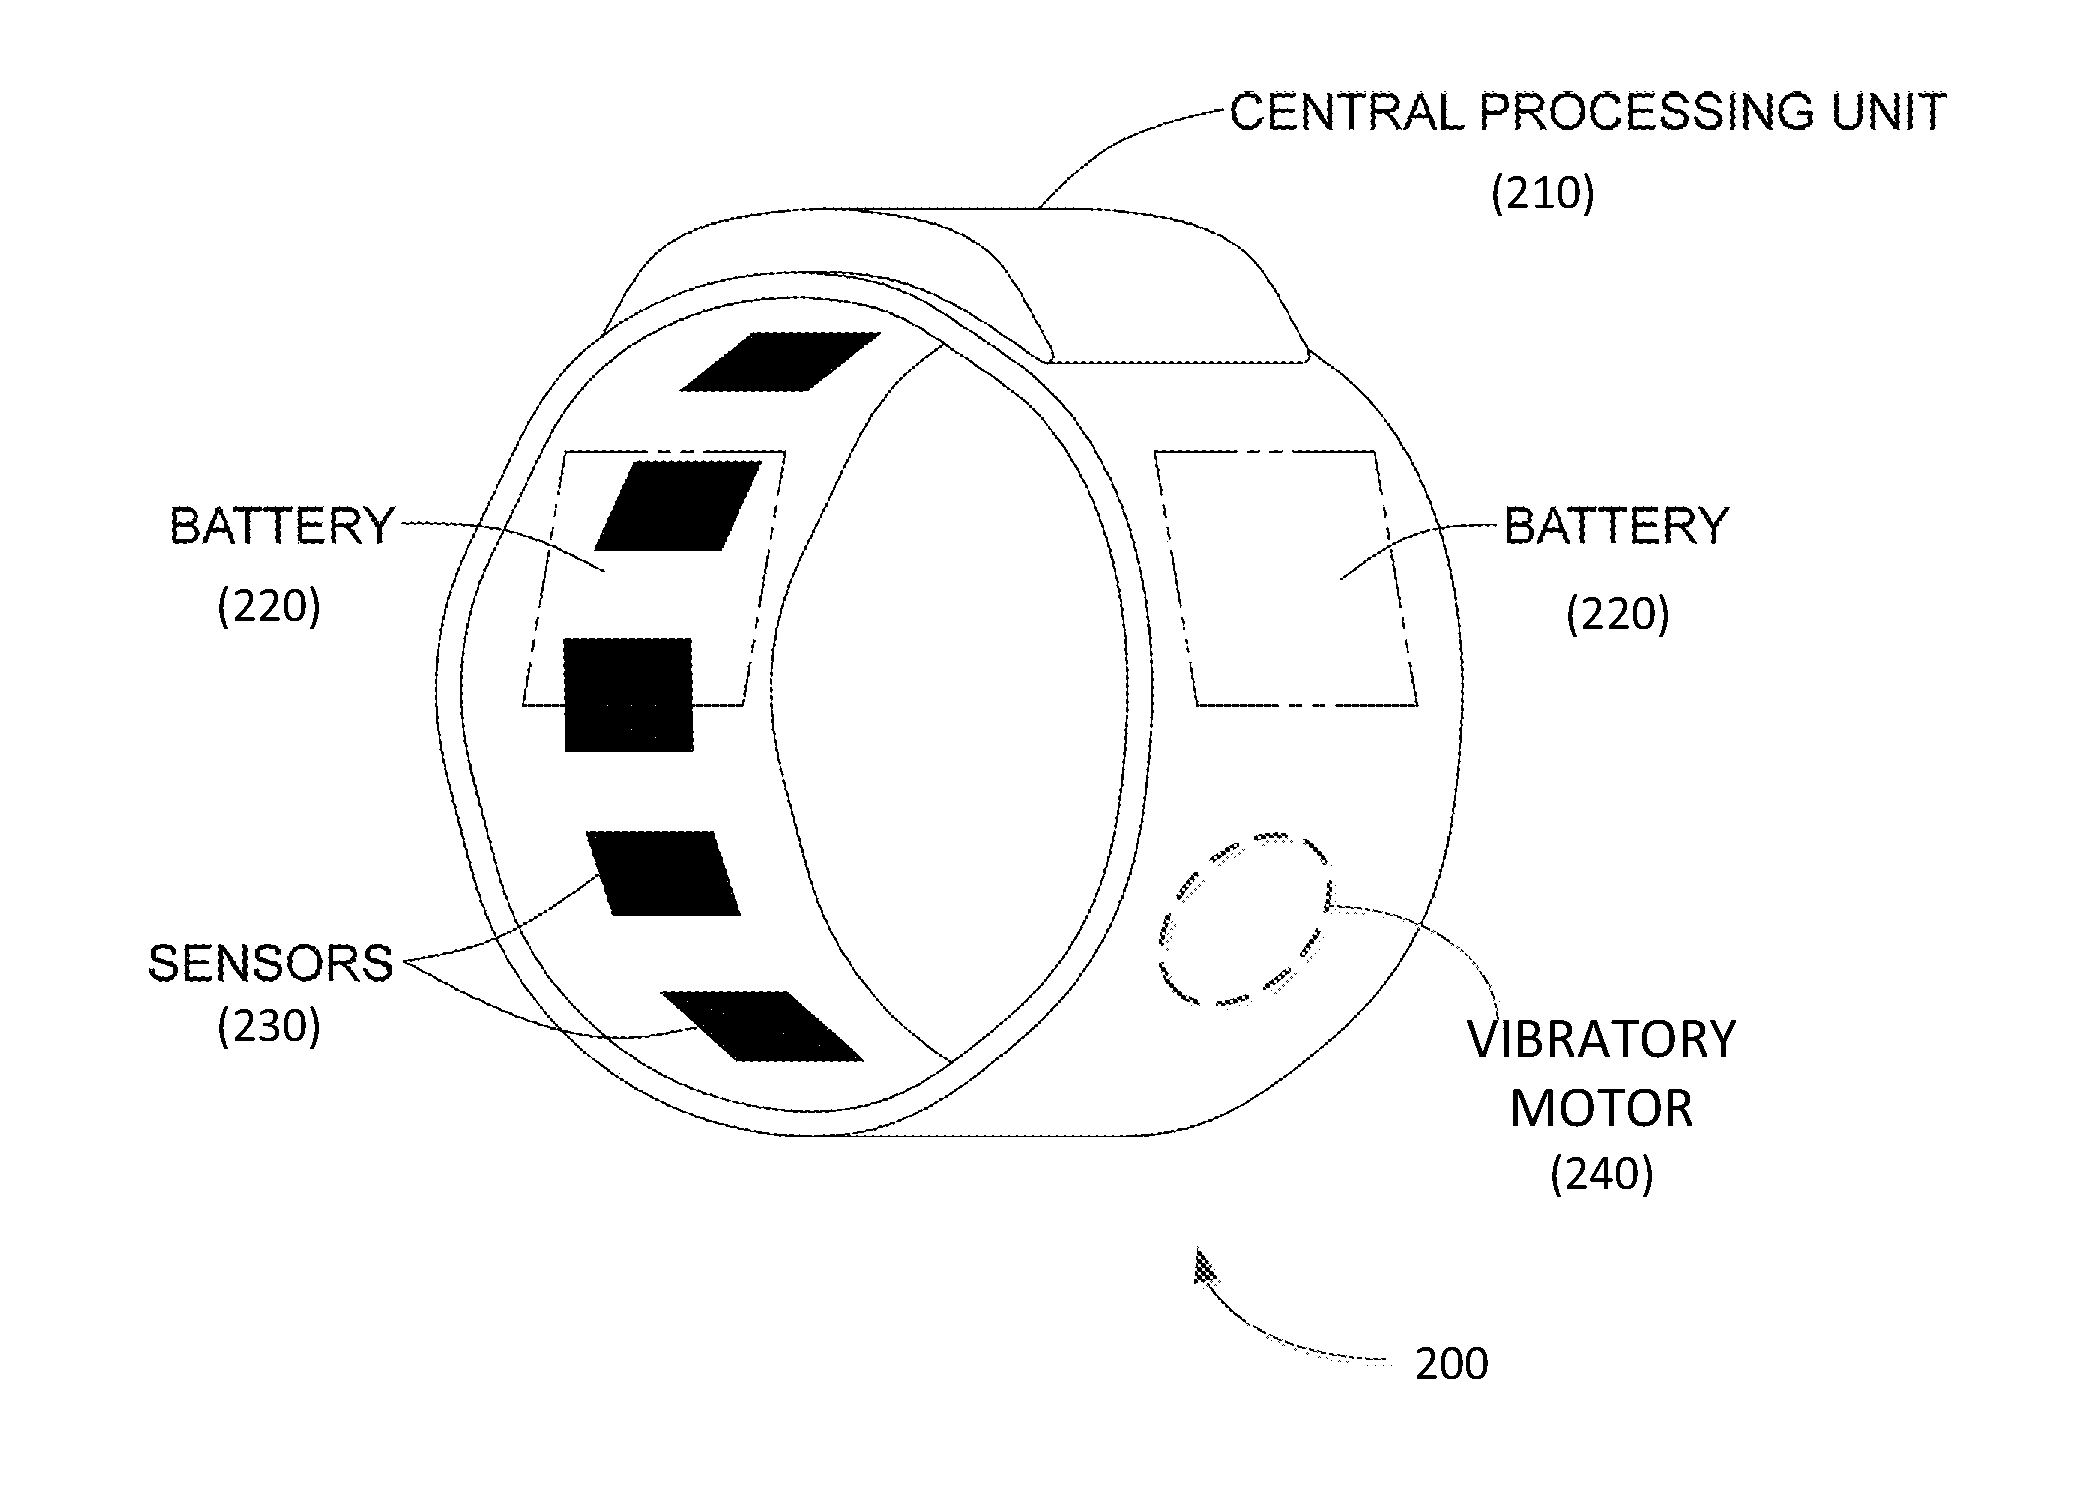 Muscle interface device and method for interacting with content displayed on wearable head mounted displays